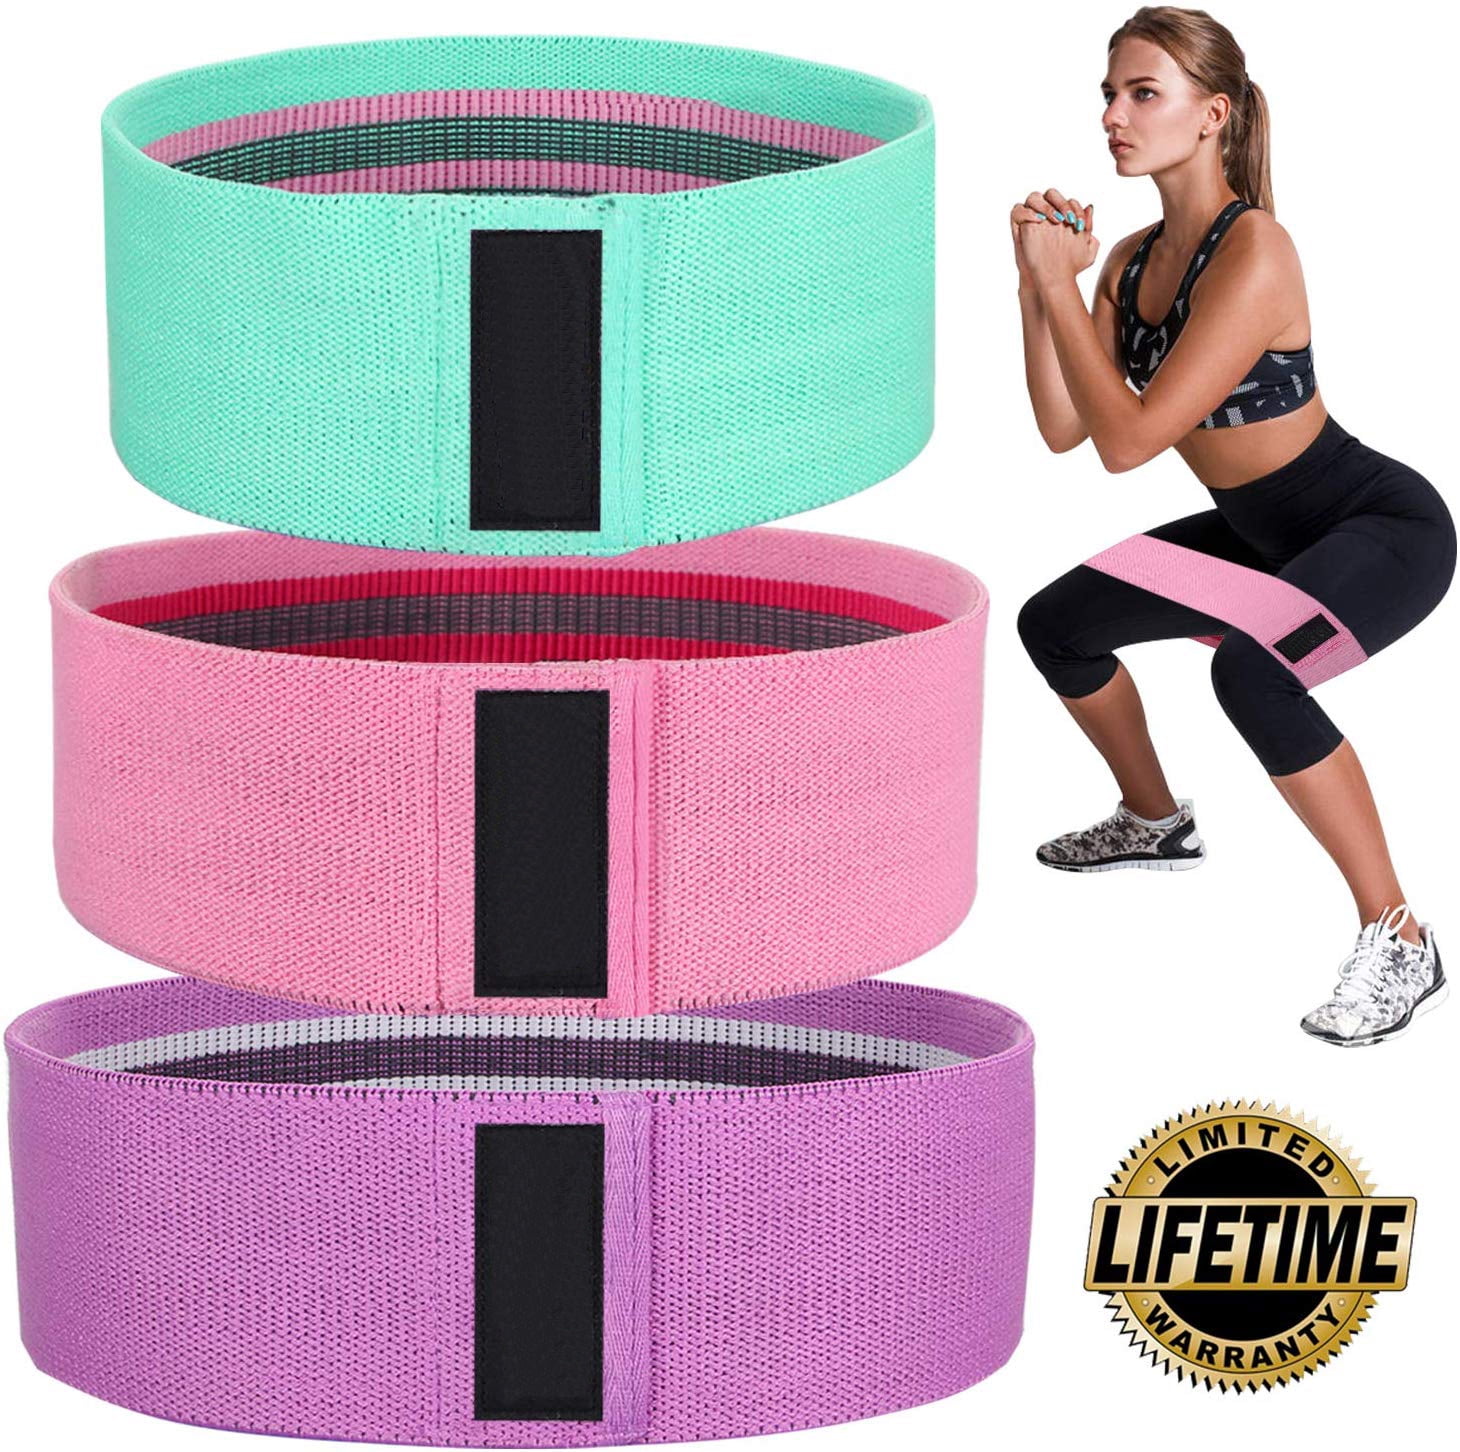 3 Pcs Exercise Workout Gym Fitness Fabric Cloth Resistance Booty Bands Loop Set 